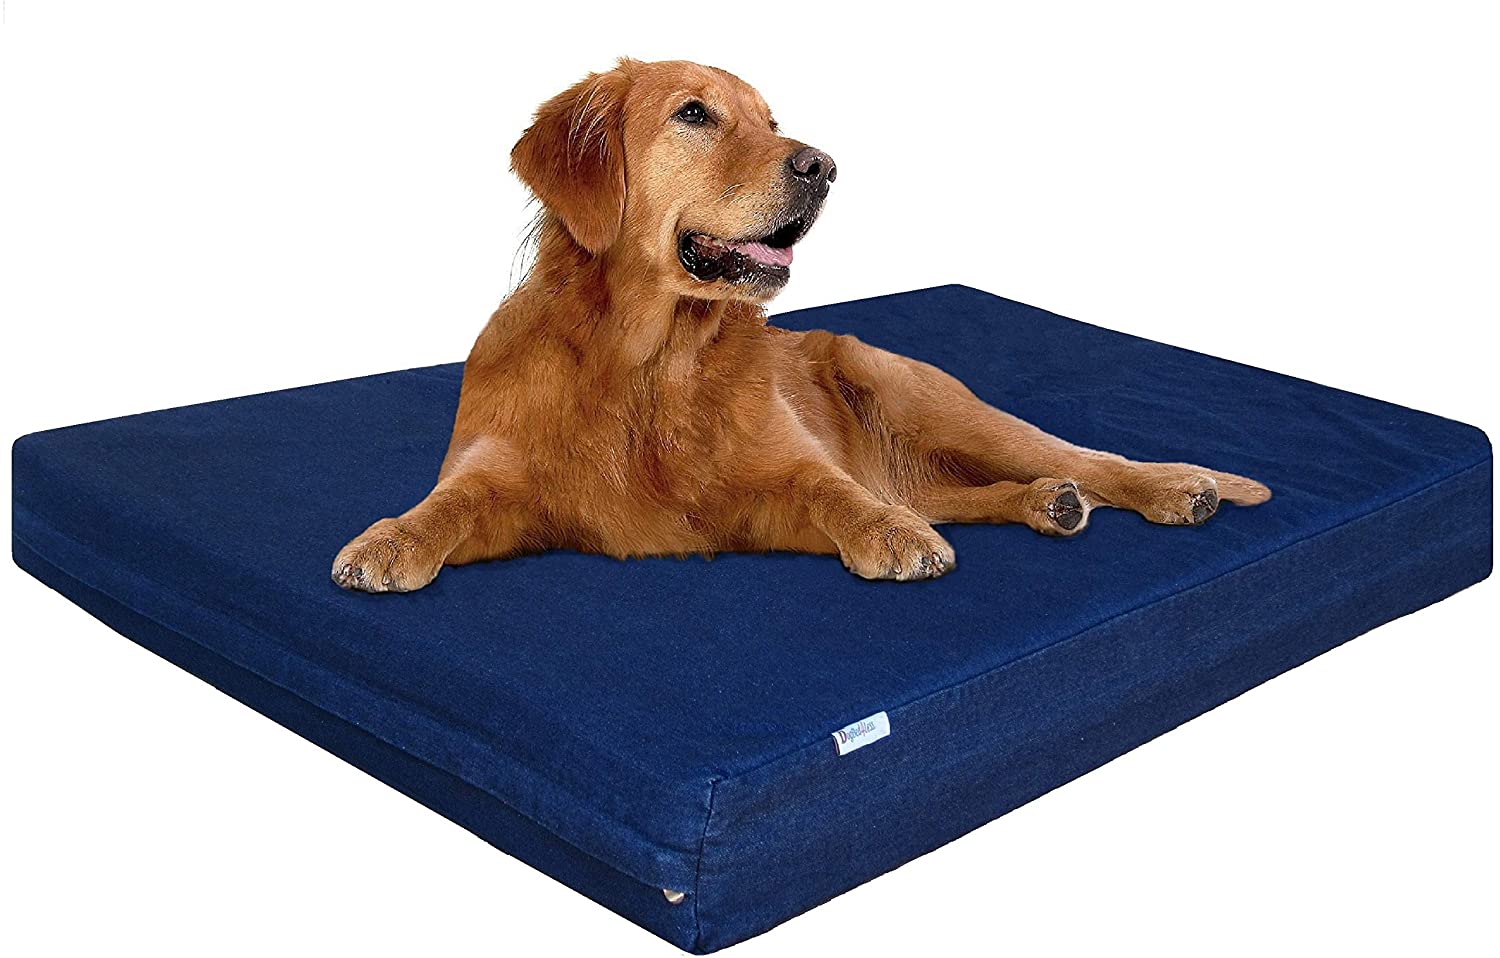 Dogbed4less Premium Memory Foam Dog Bed